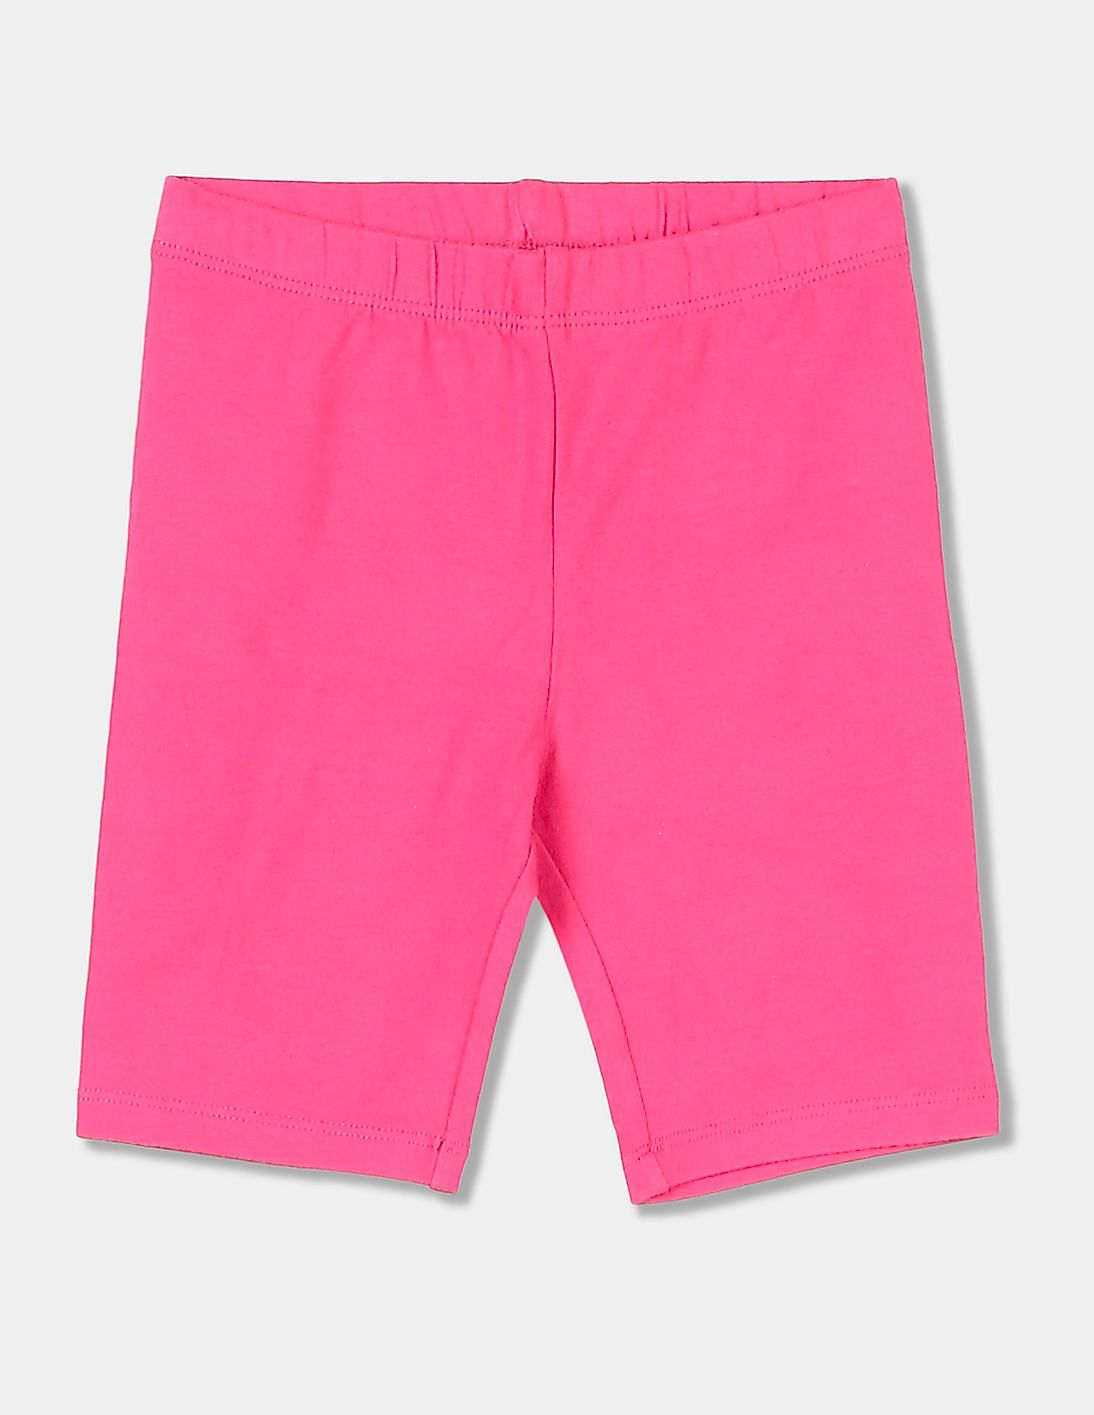 Buy The Children's Place Girls Girls Pink Solid Bike Shorts - NNNOW.com